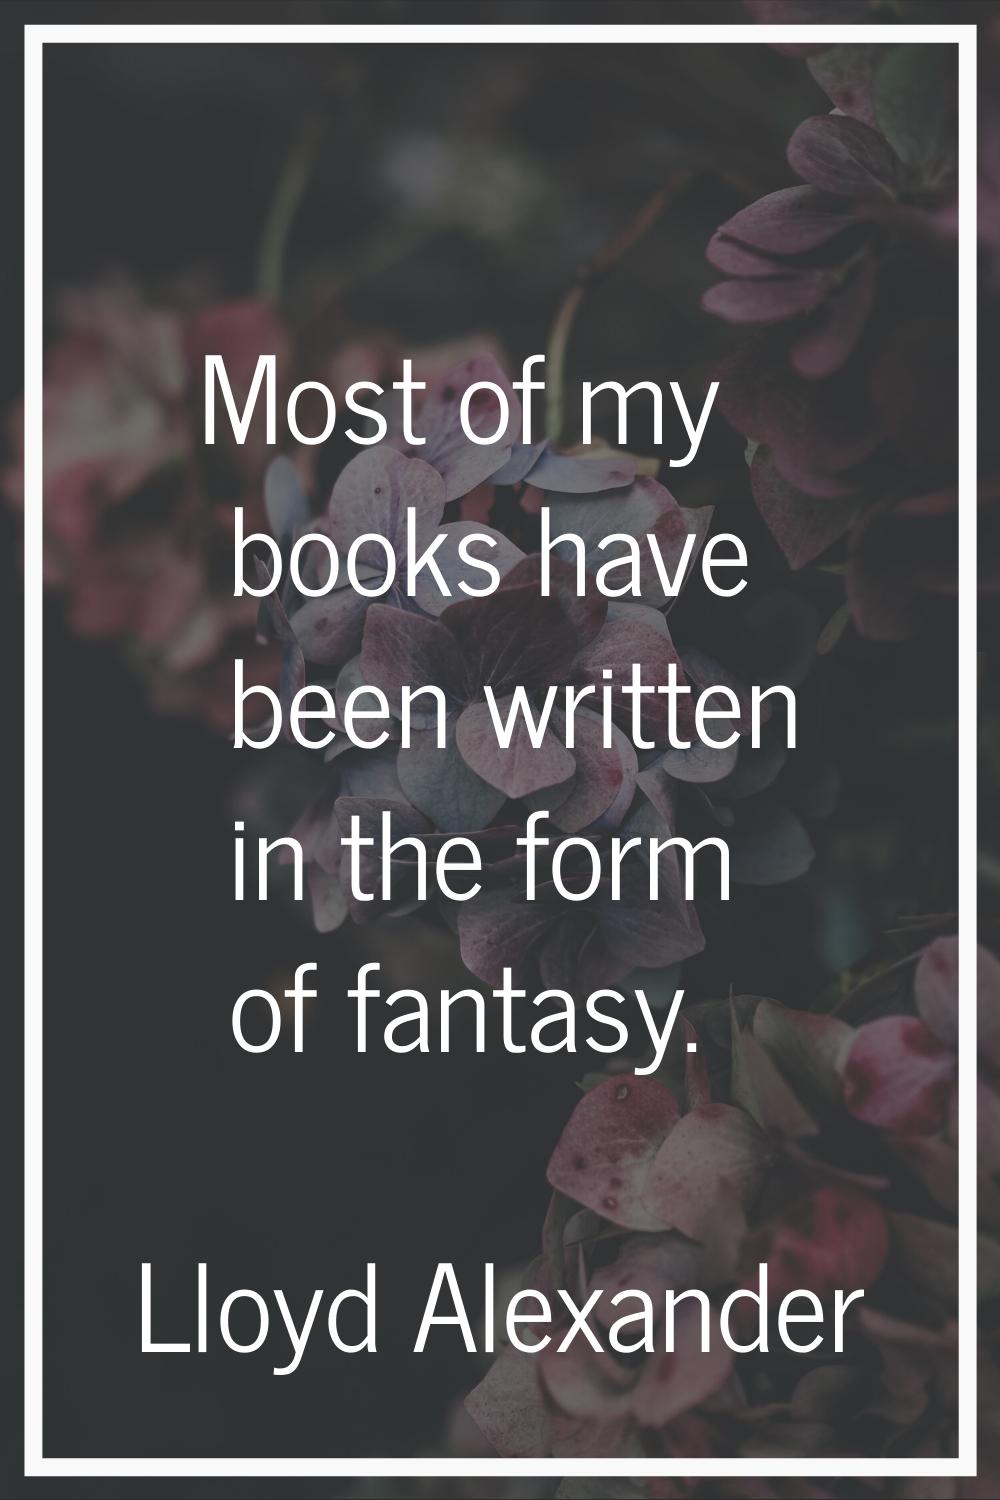 Most of my books have been written in the form of fantasy.